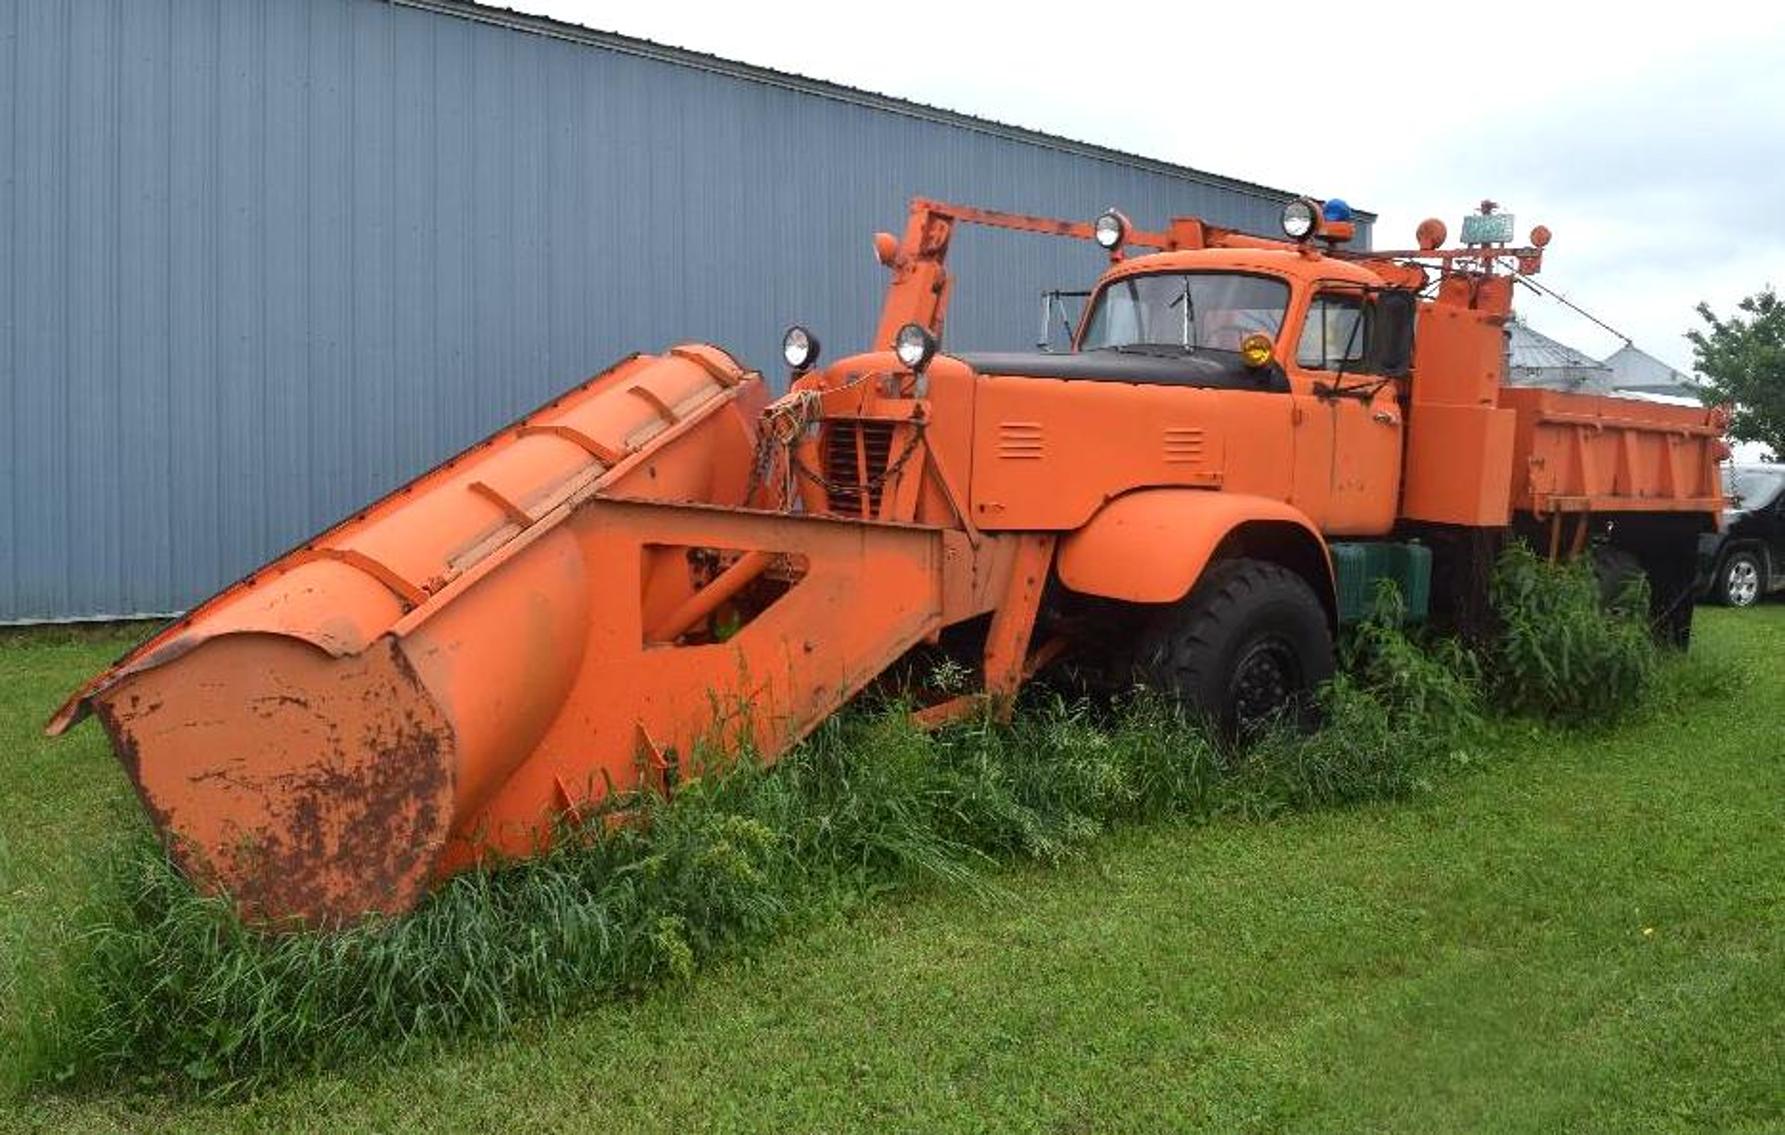 Personal Property Reduction Auction: FWD Plow Truck, Bobcat Skid Loader, Super Cruiser Project Plane